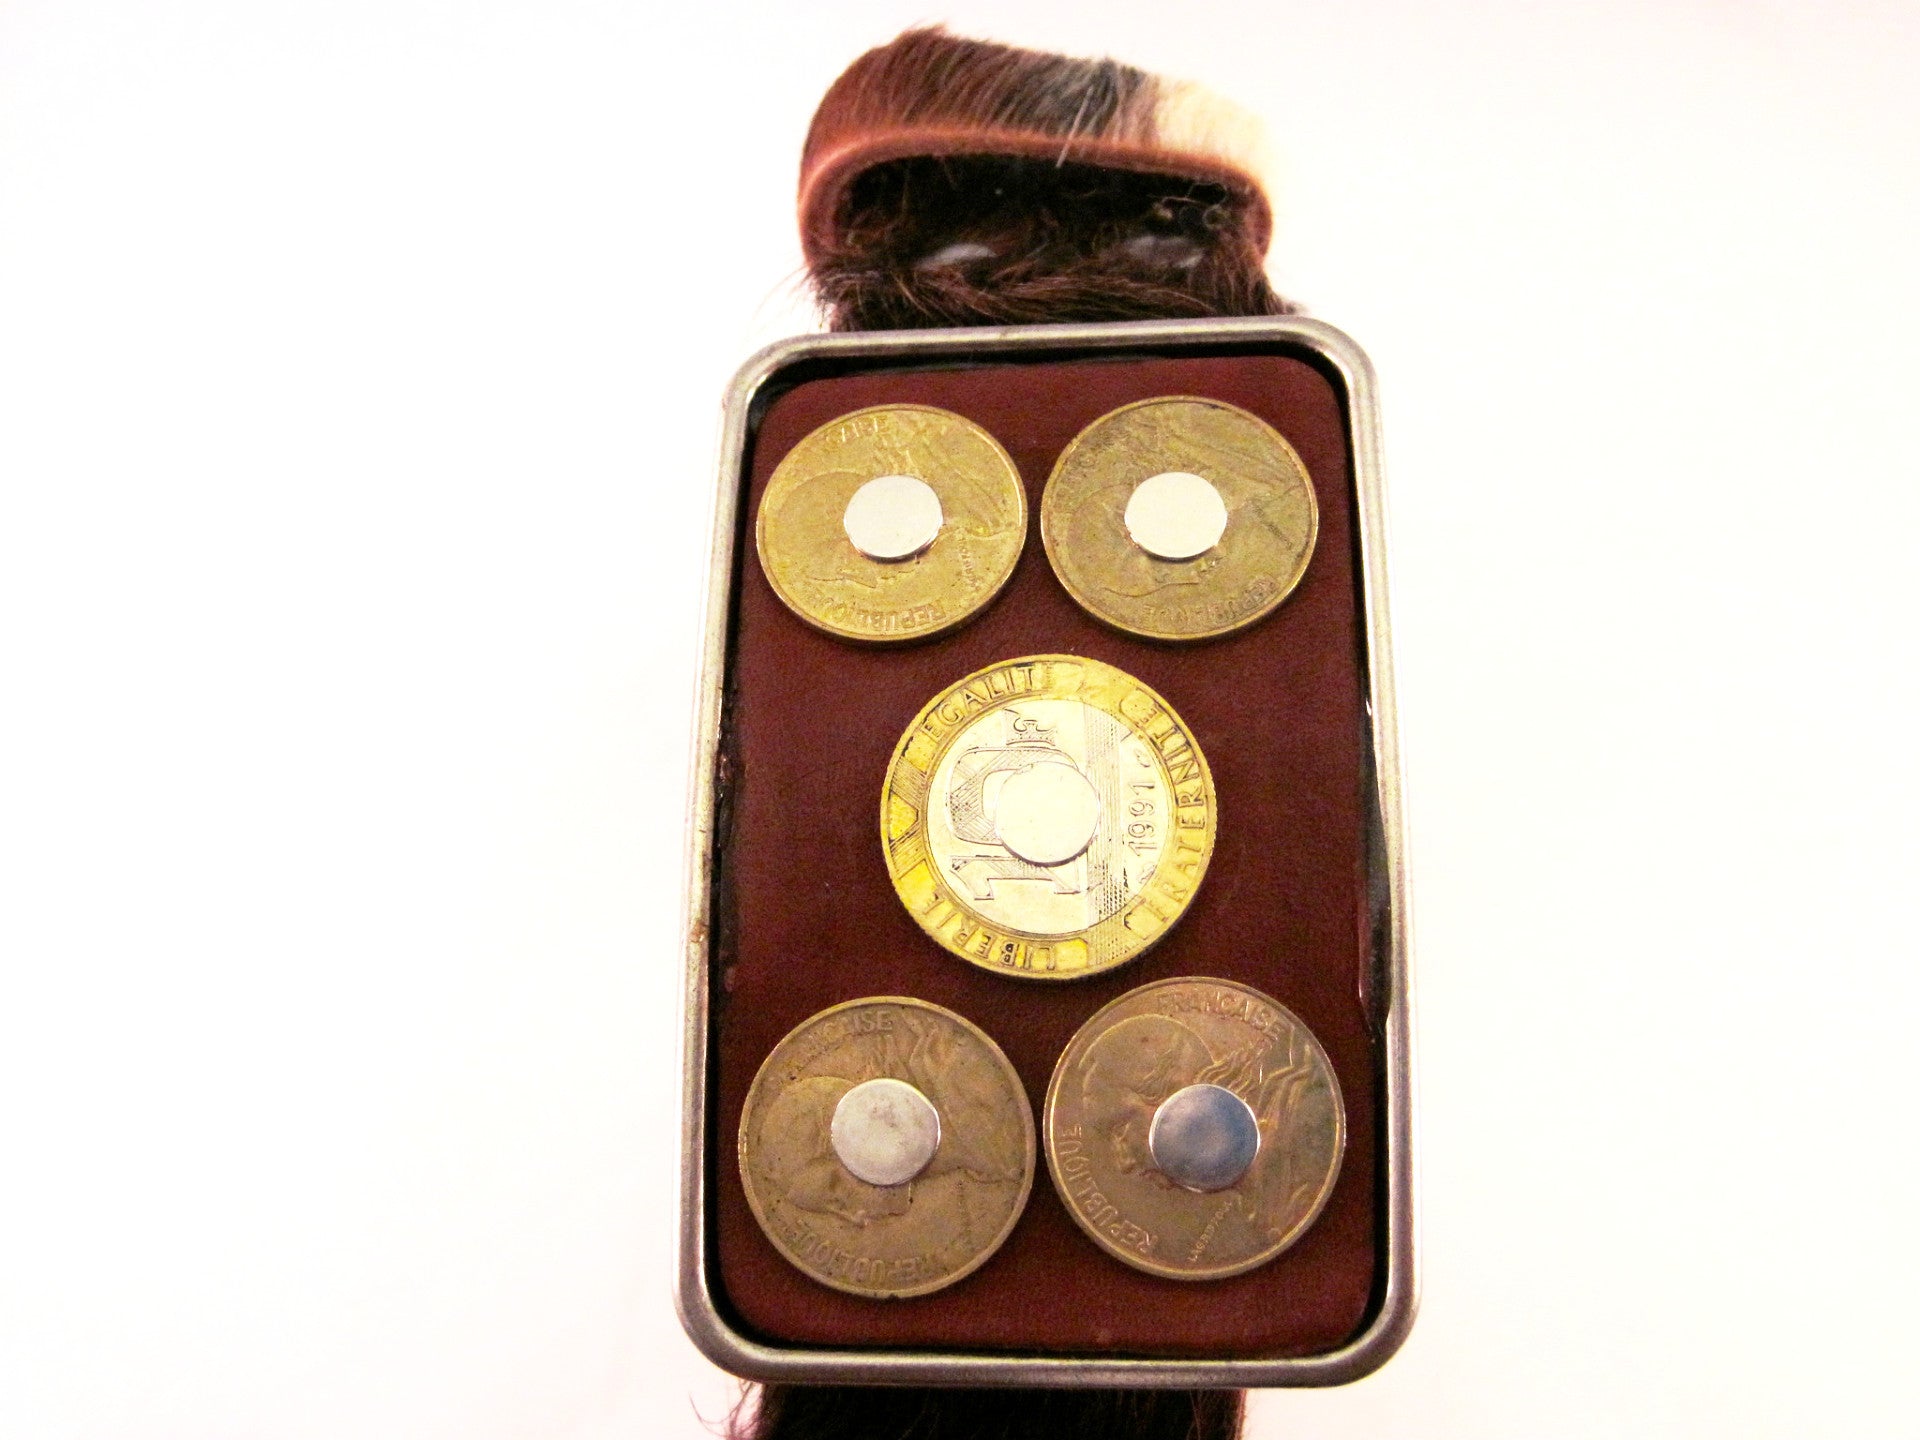 HAIR-ON COWHIDE BELT WITH STUDDED FRENCH FRANC COINS ON THE BUCKLE by NYET Jewelry.